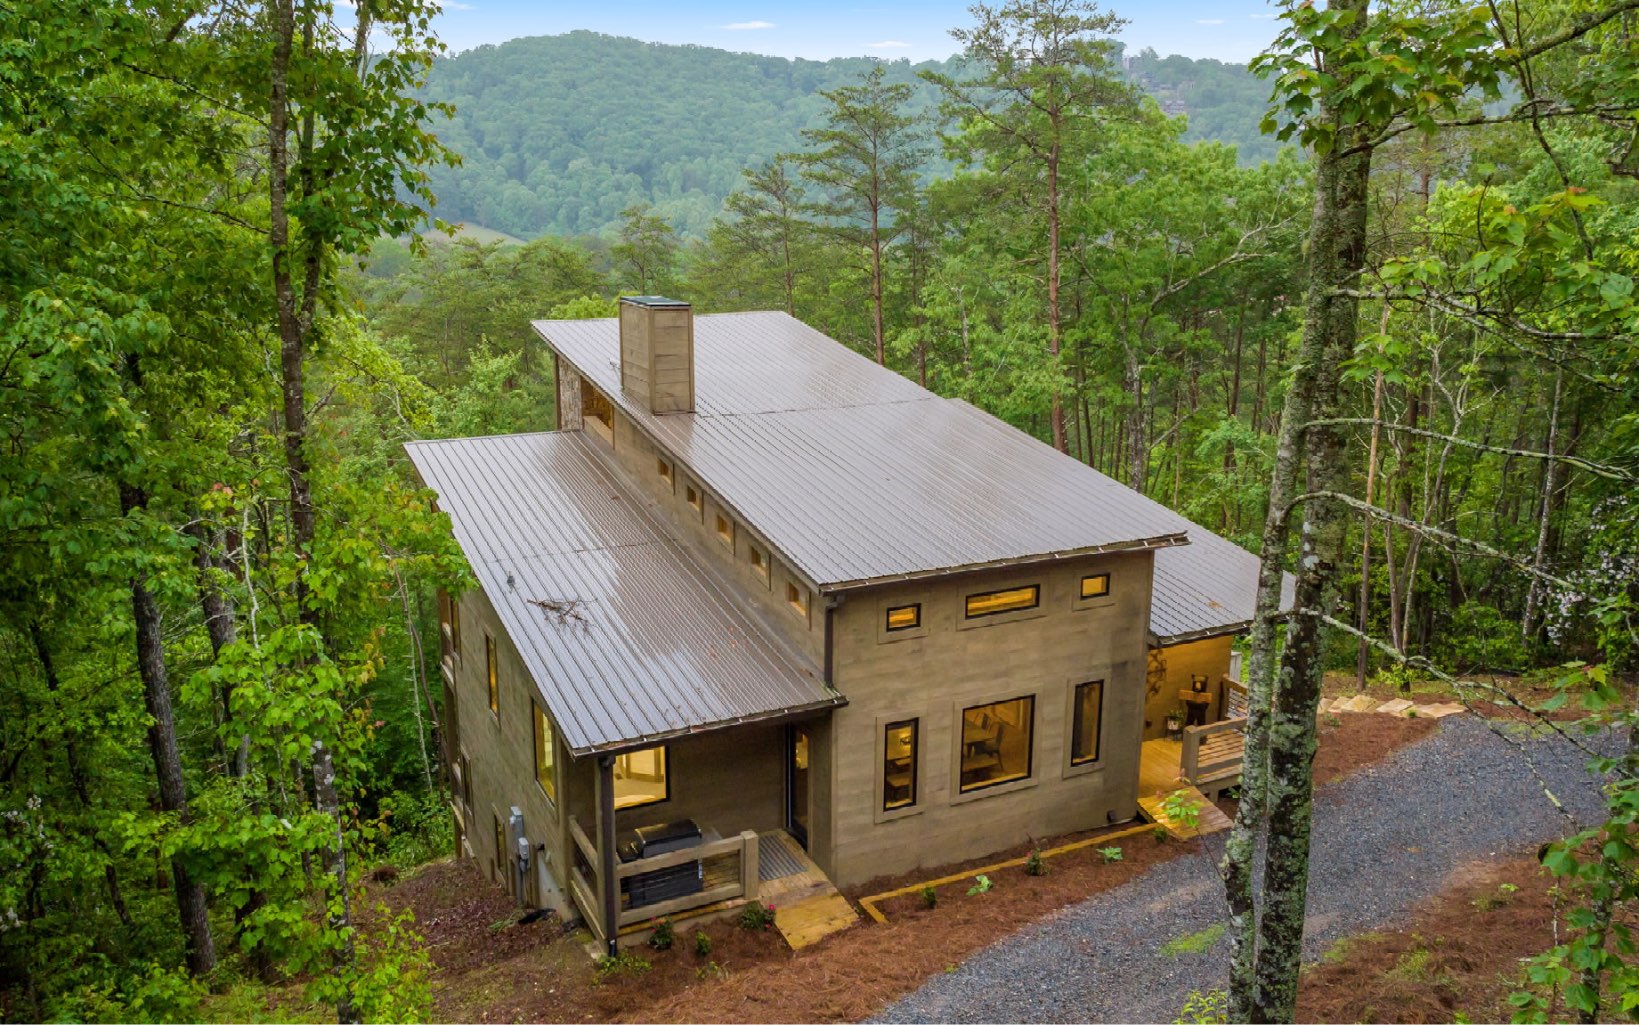 Located only 3 miles from downtown Blue Ridge and sold turn key! Step inside this architectural gem and be captivated by the open layout! Iinterior features clean lines, high ceilings, and an abundance of natural light. The finishes and materials lend a touch of sophistication, while still maintaining a cozy and inviting atmosphere.This cabin offers 4 beds/3.5 baths, providing ample space for family and guests. The master suite is a true oasis, with a luxurious ensuite bathroom and private access to the outdoors. Wake up to breathtaking views of the surrounding mountains while sipping morning coffee on the deck. The kitchen is a chef's dream with ample storage and sleek countertops. Entertain guests in the open-concept living and dining area, or cozy up to one of the 4 fireplaces. The cabin boasts an expansive deck that serves as an outdoor living space, ideal for relaxation and entertaining. Soak in the hot tub, take in the scenic beauty, or gather around the fire pit on cool evenings. The property is surrounded by lush greenery and offers privacy, allowing you to enjoy the tranquility of nature. Beyond the cabin's modern comforts, its location is truly unbeatable.